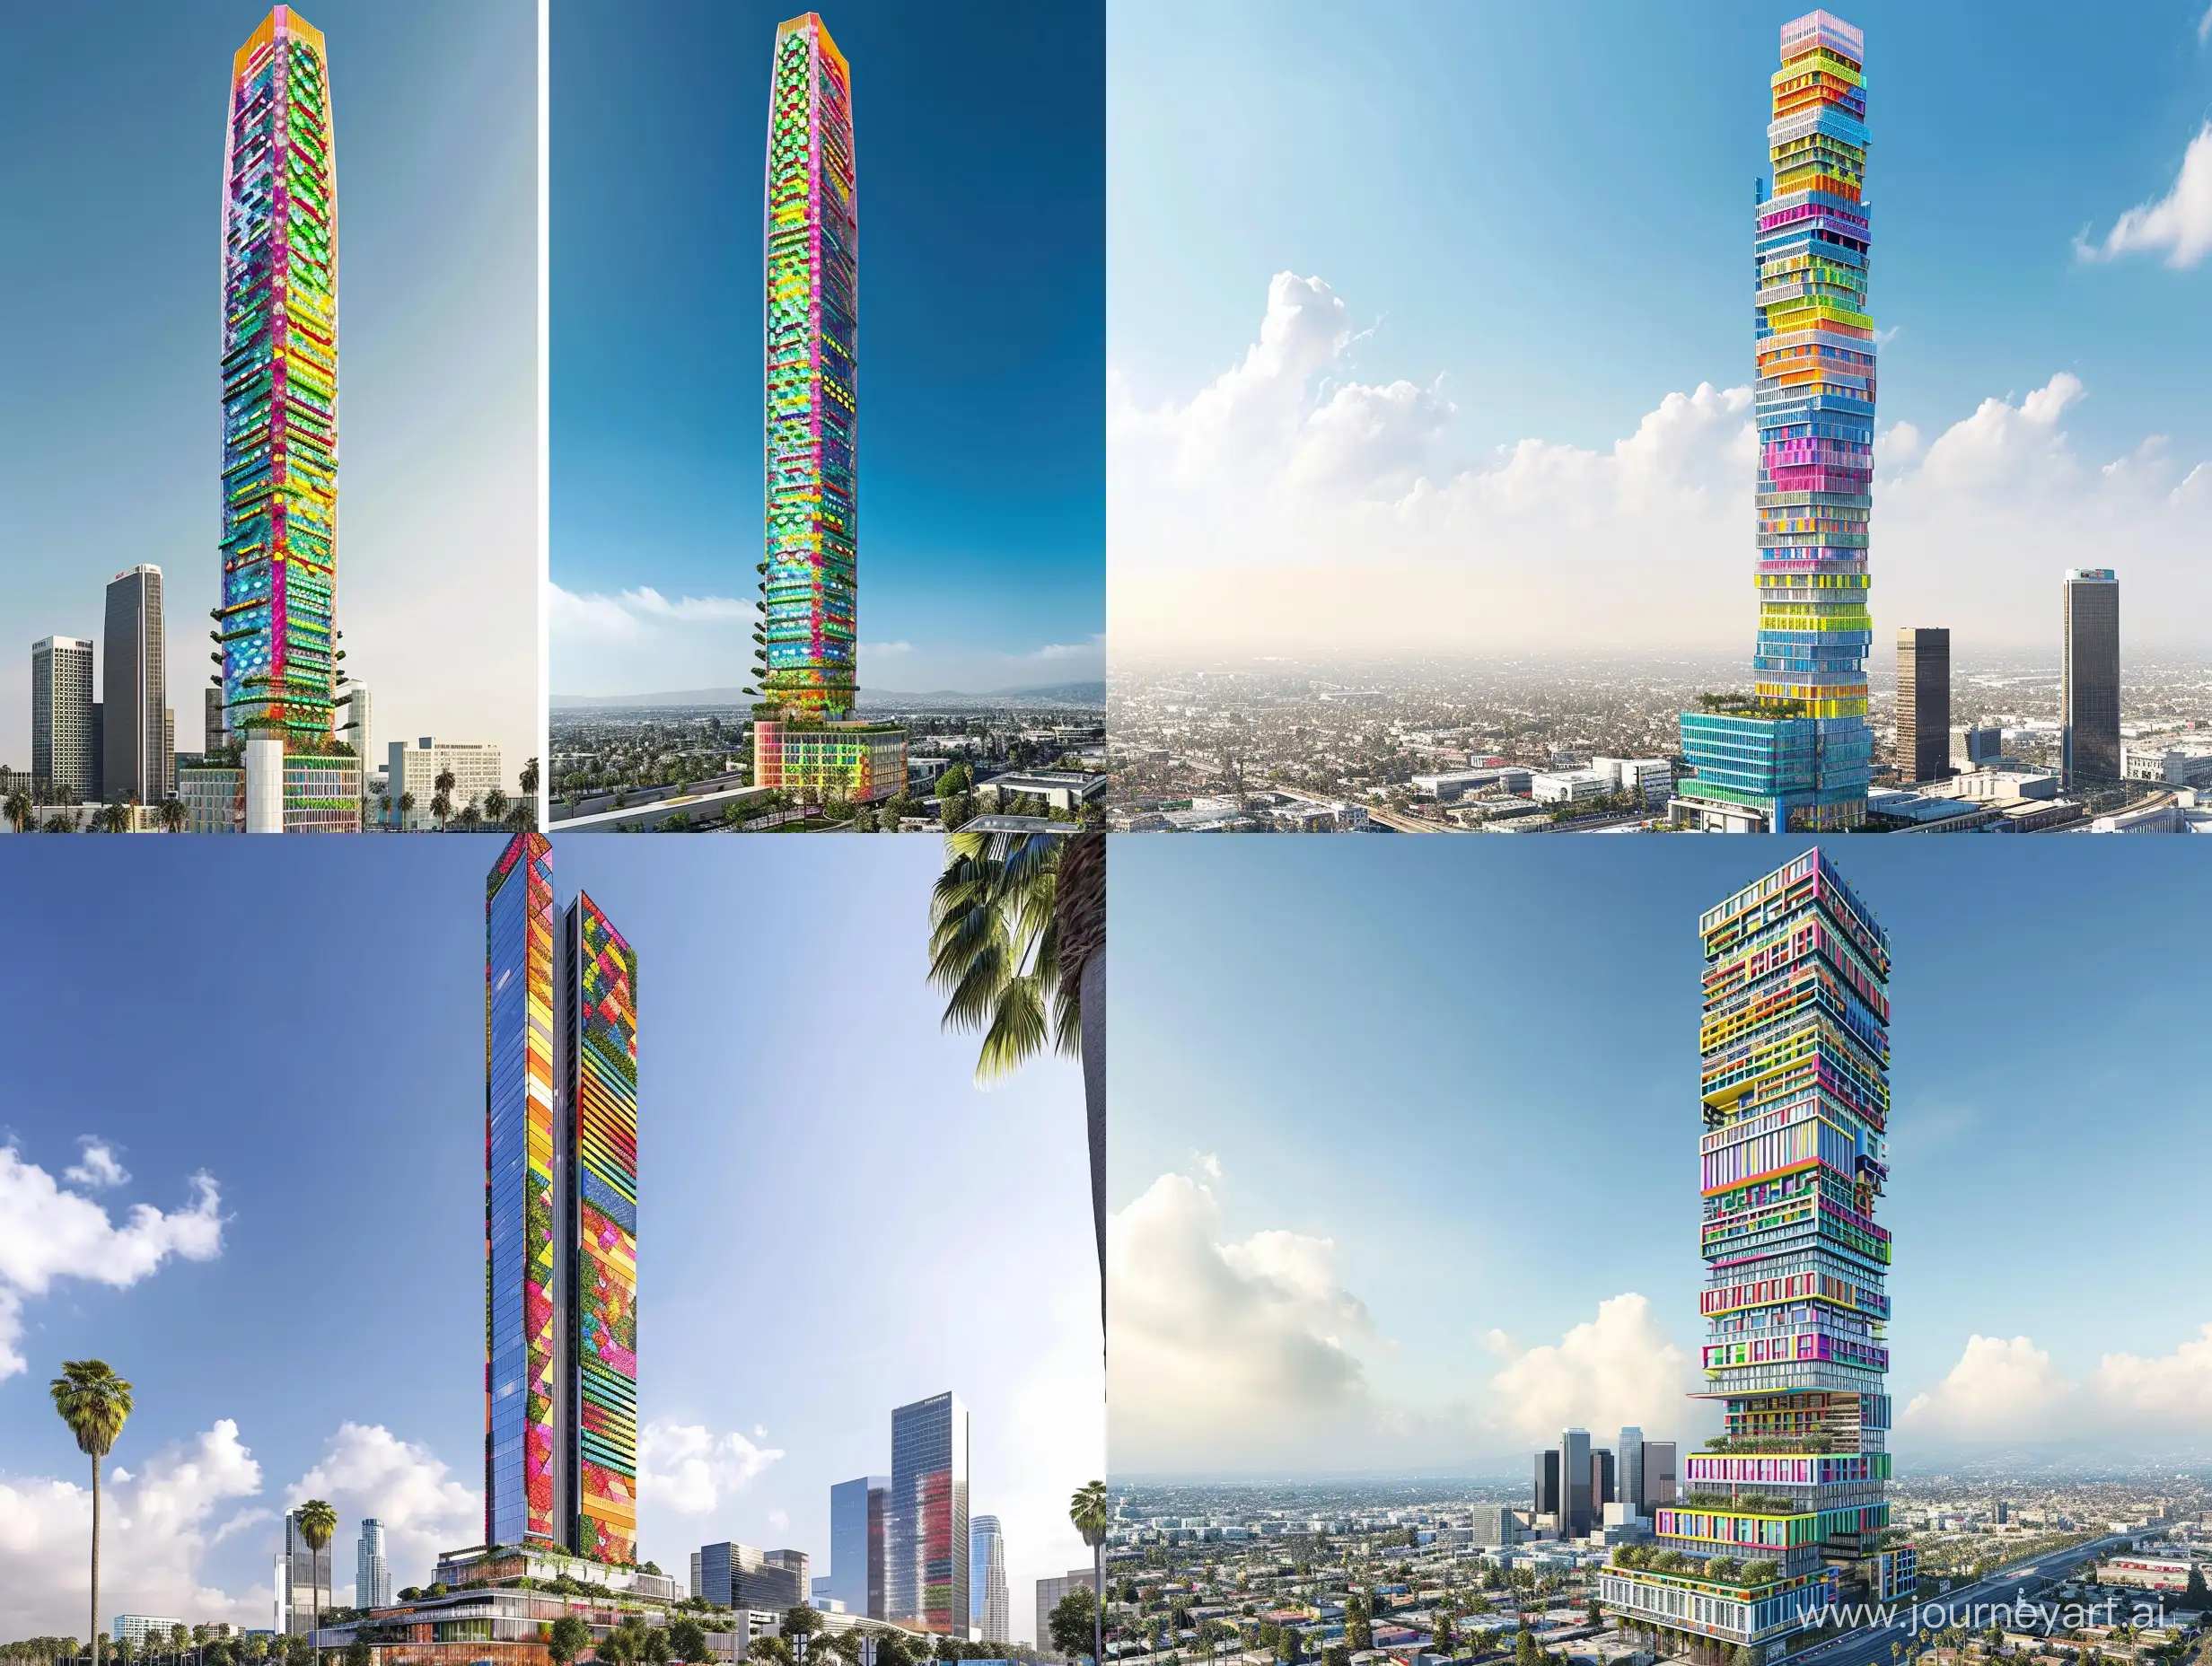 a modern skyscraper with a height of at least 500 meters with a colorful exterior designs inspired by traditional Turkish architecture which suits the skyline of Los Angeles